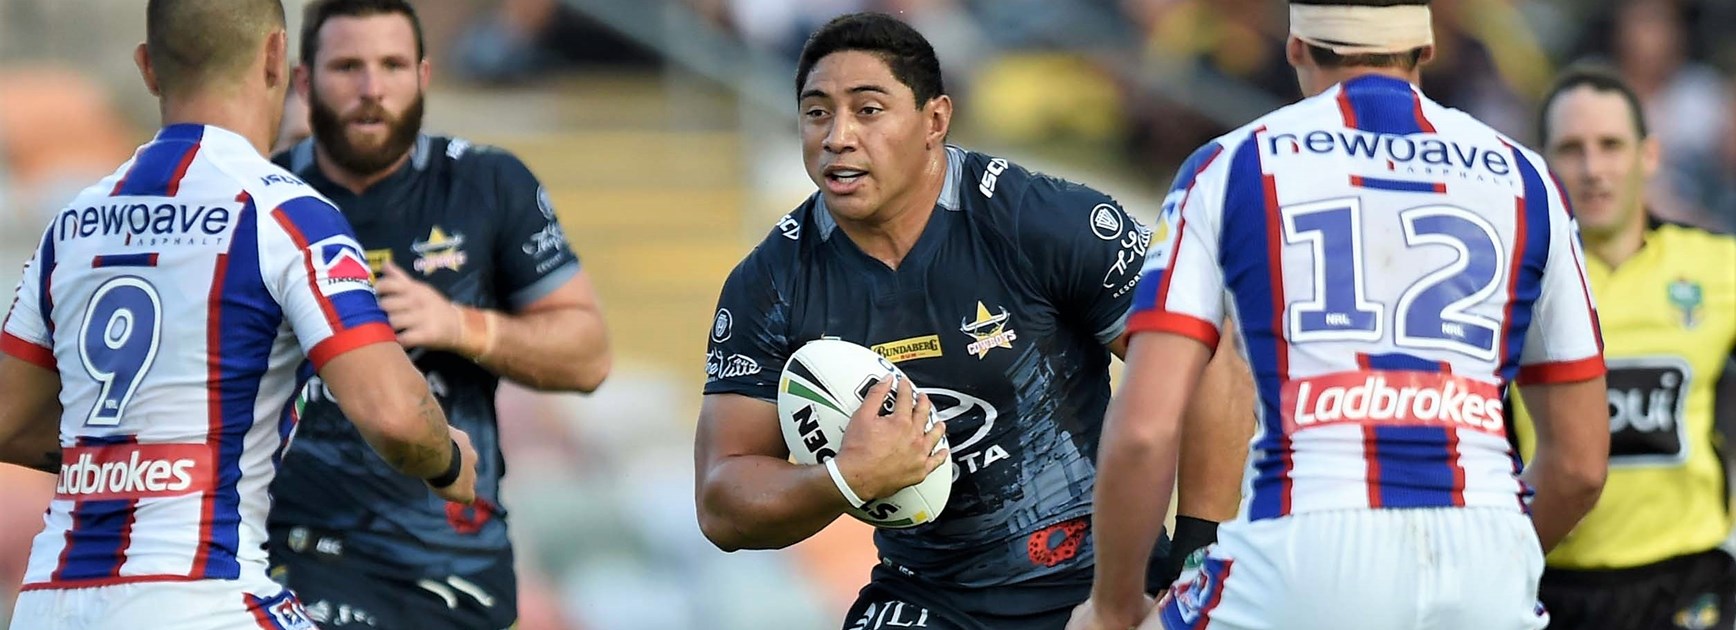 Harry Potter and vegetarian diet making Taumalolo even better